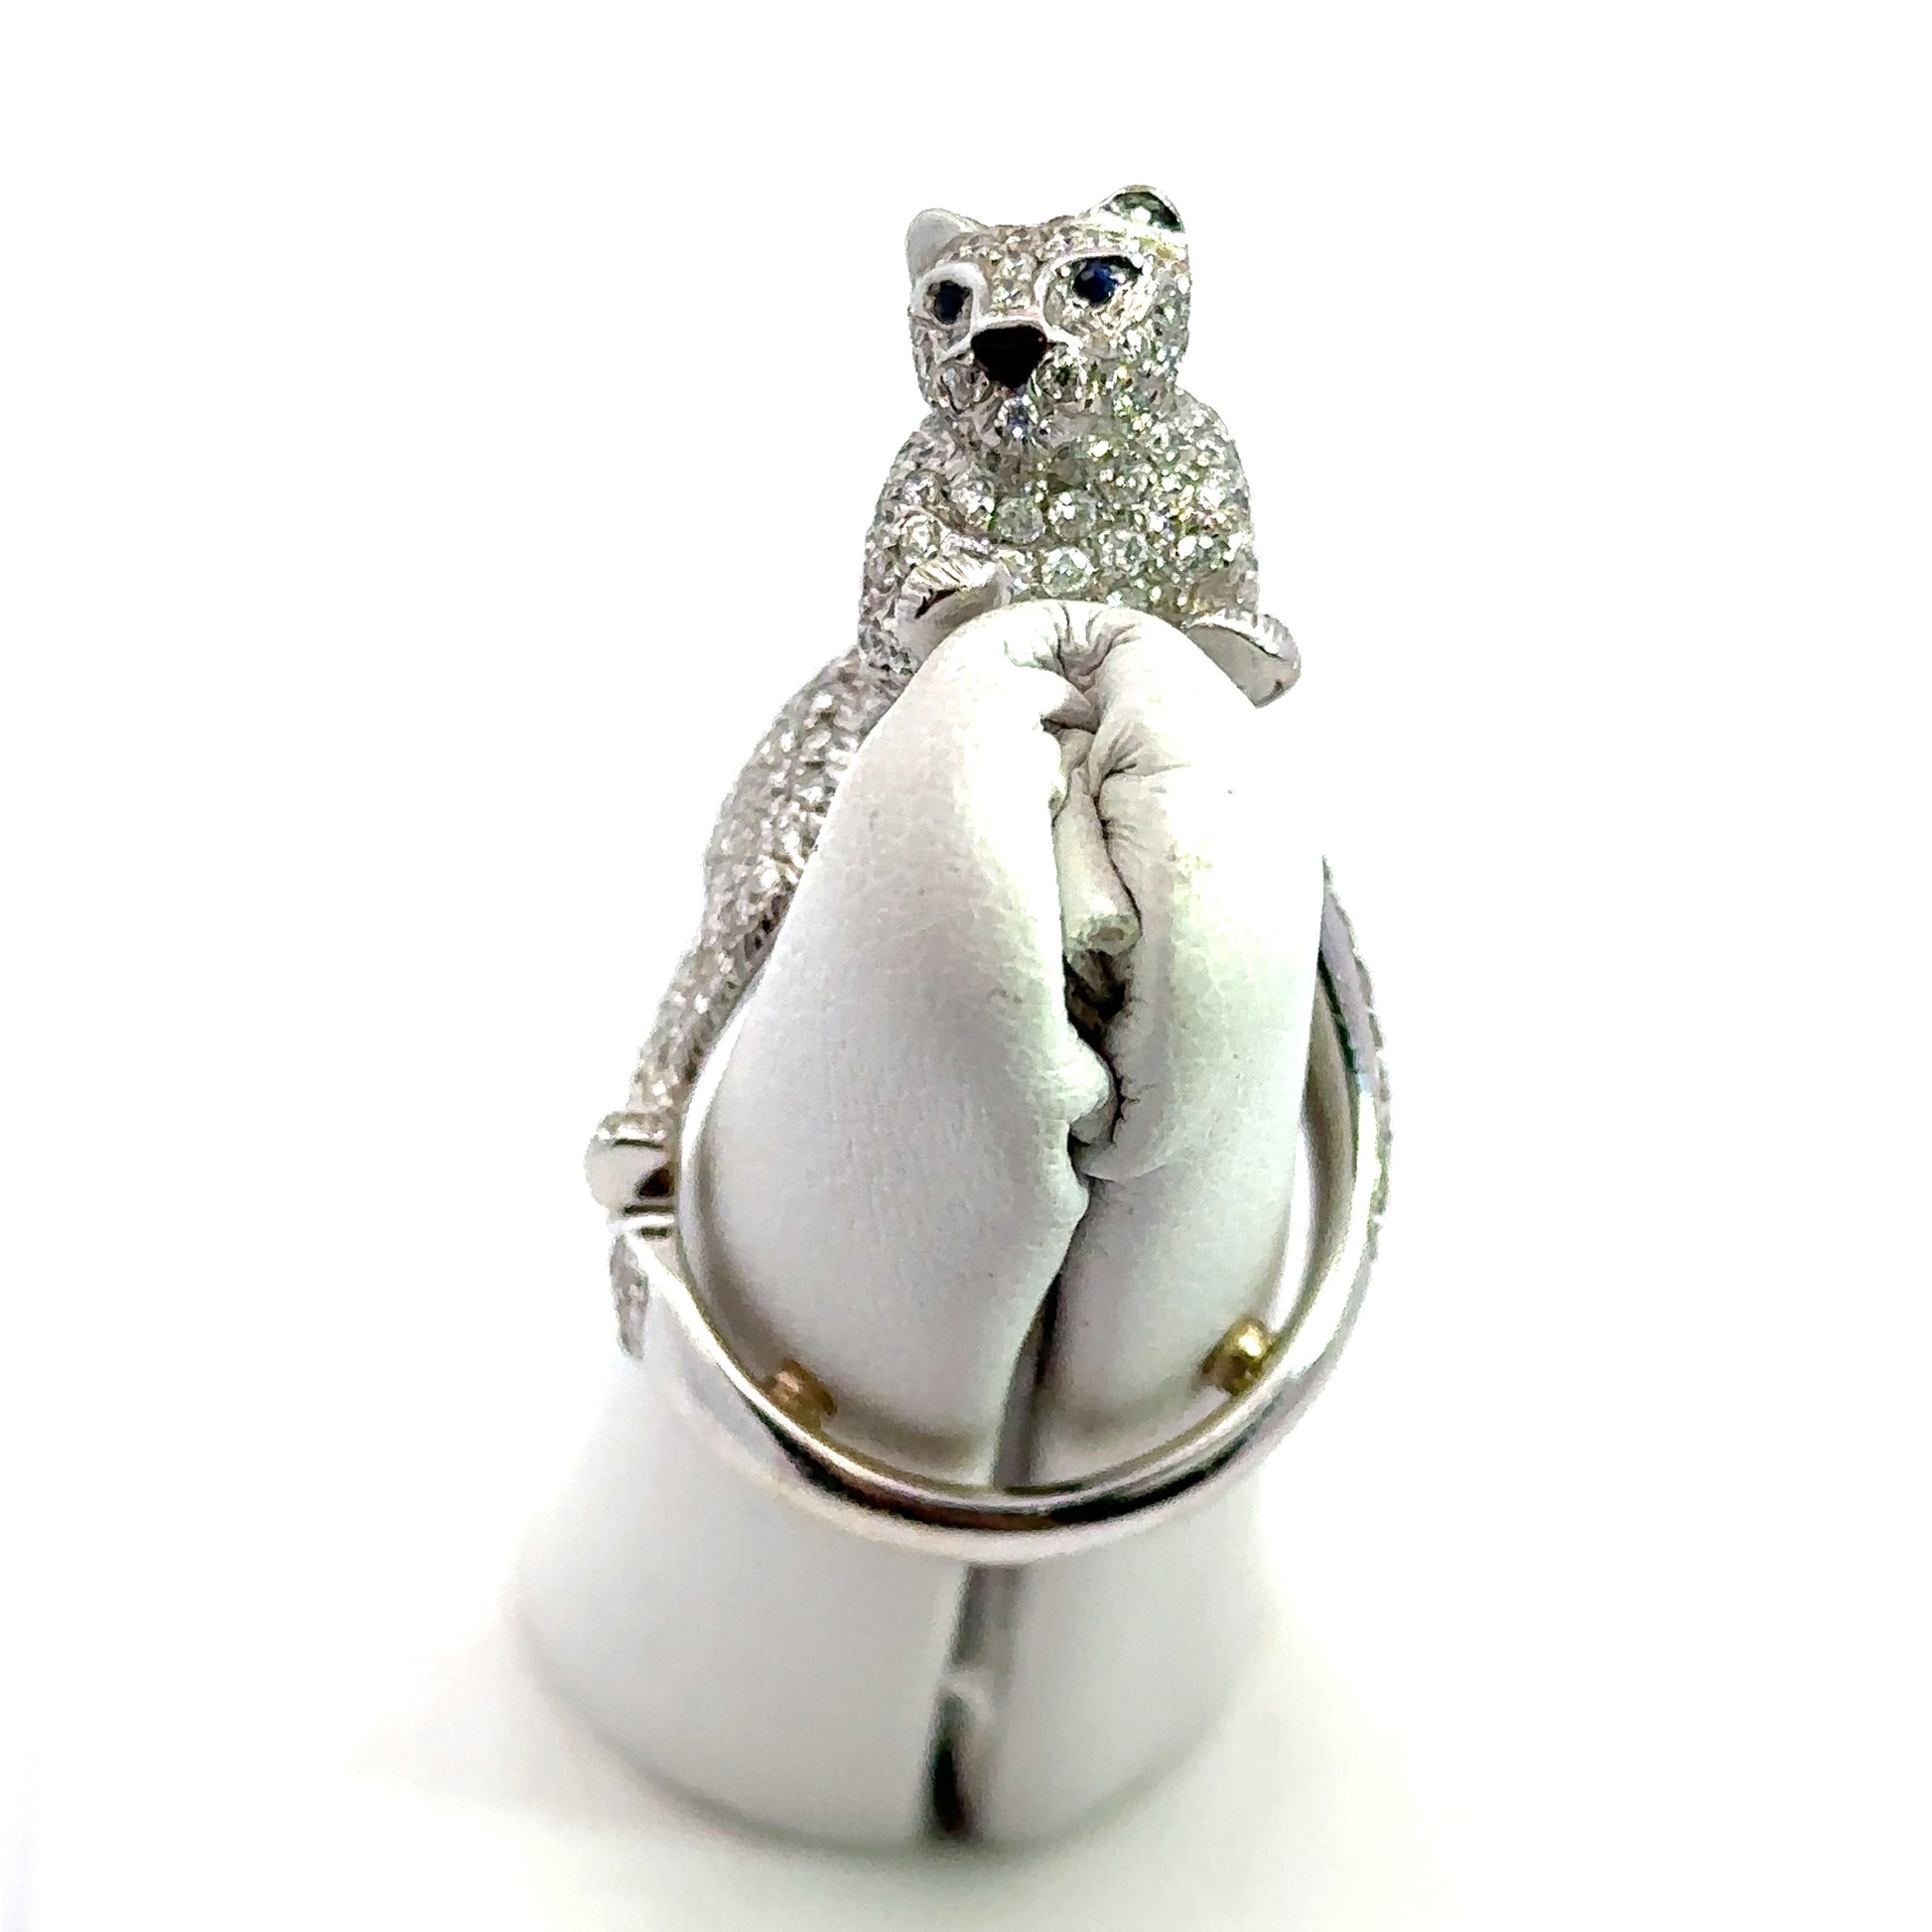 Front of diamond panther ring. There are 2 sizing beads in th ering.